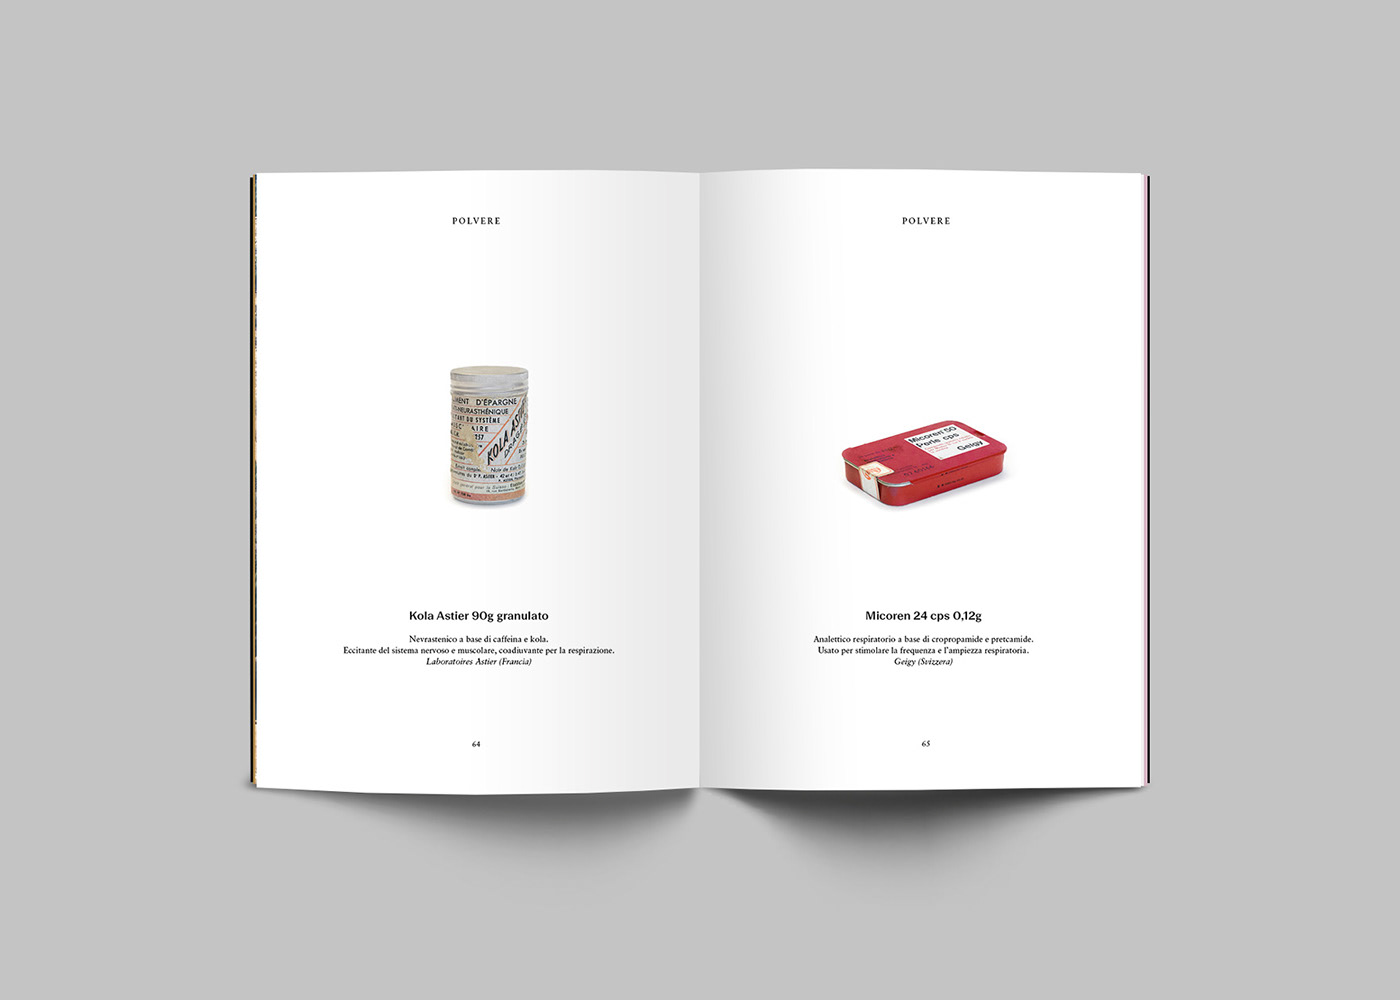 Cycling Drugs medicines photo storytelling   article typography   graphic magazine